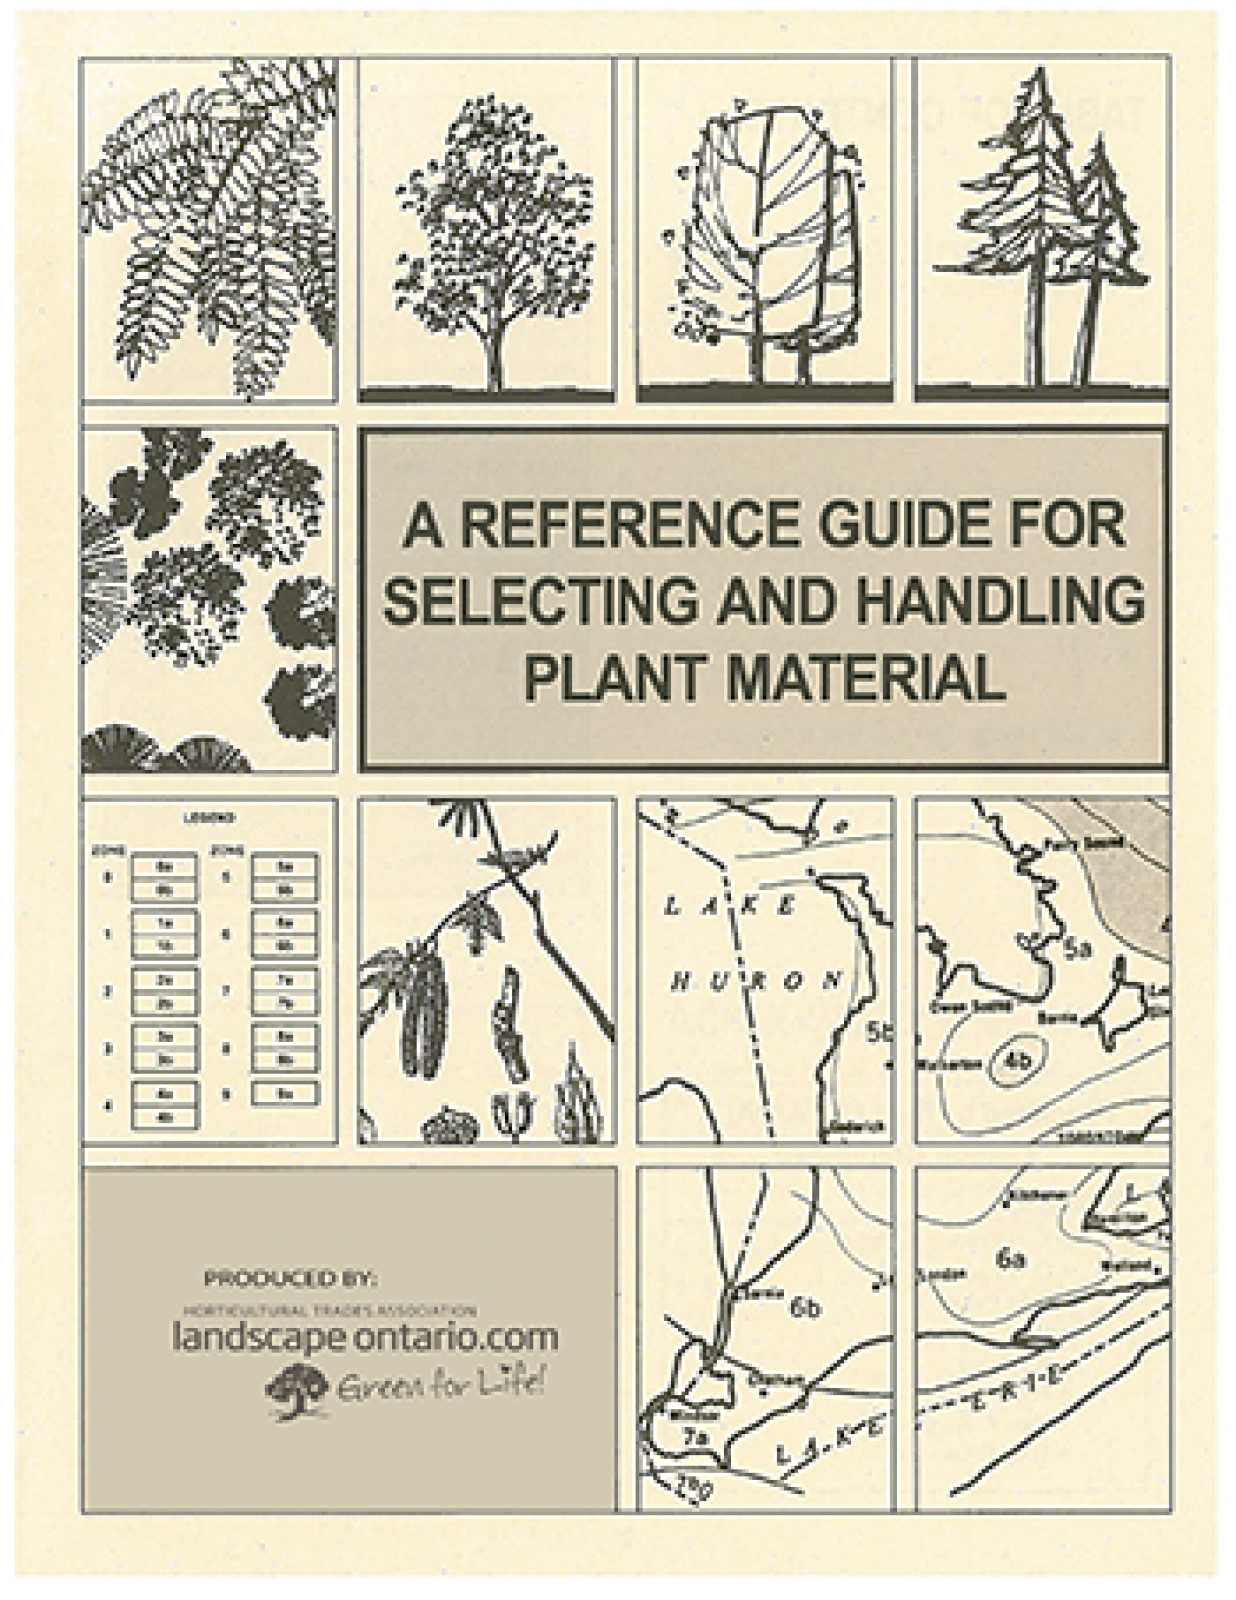 A Reference Guide for Selecting and Handling Plant Material-1